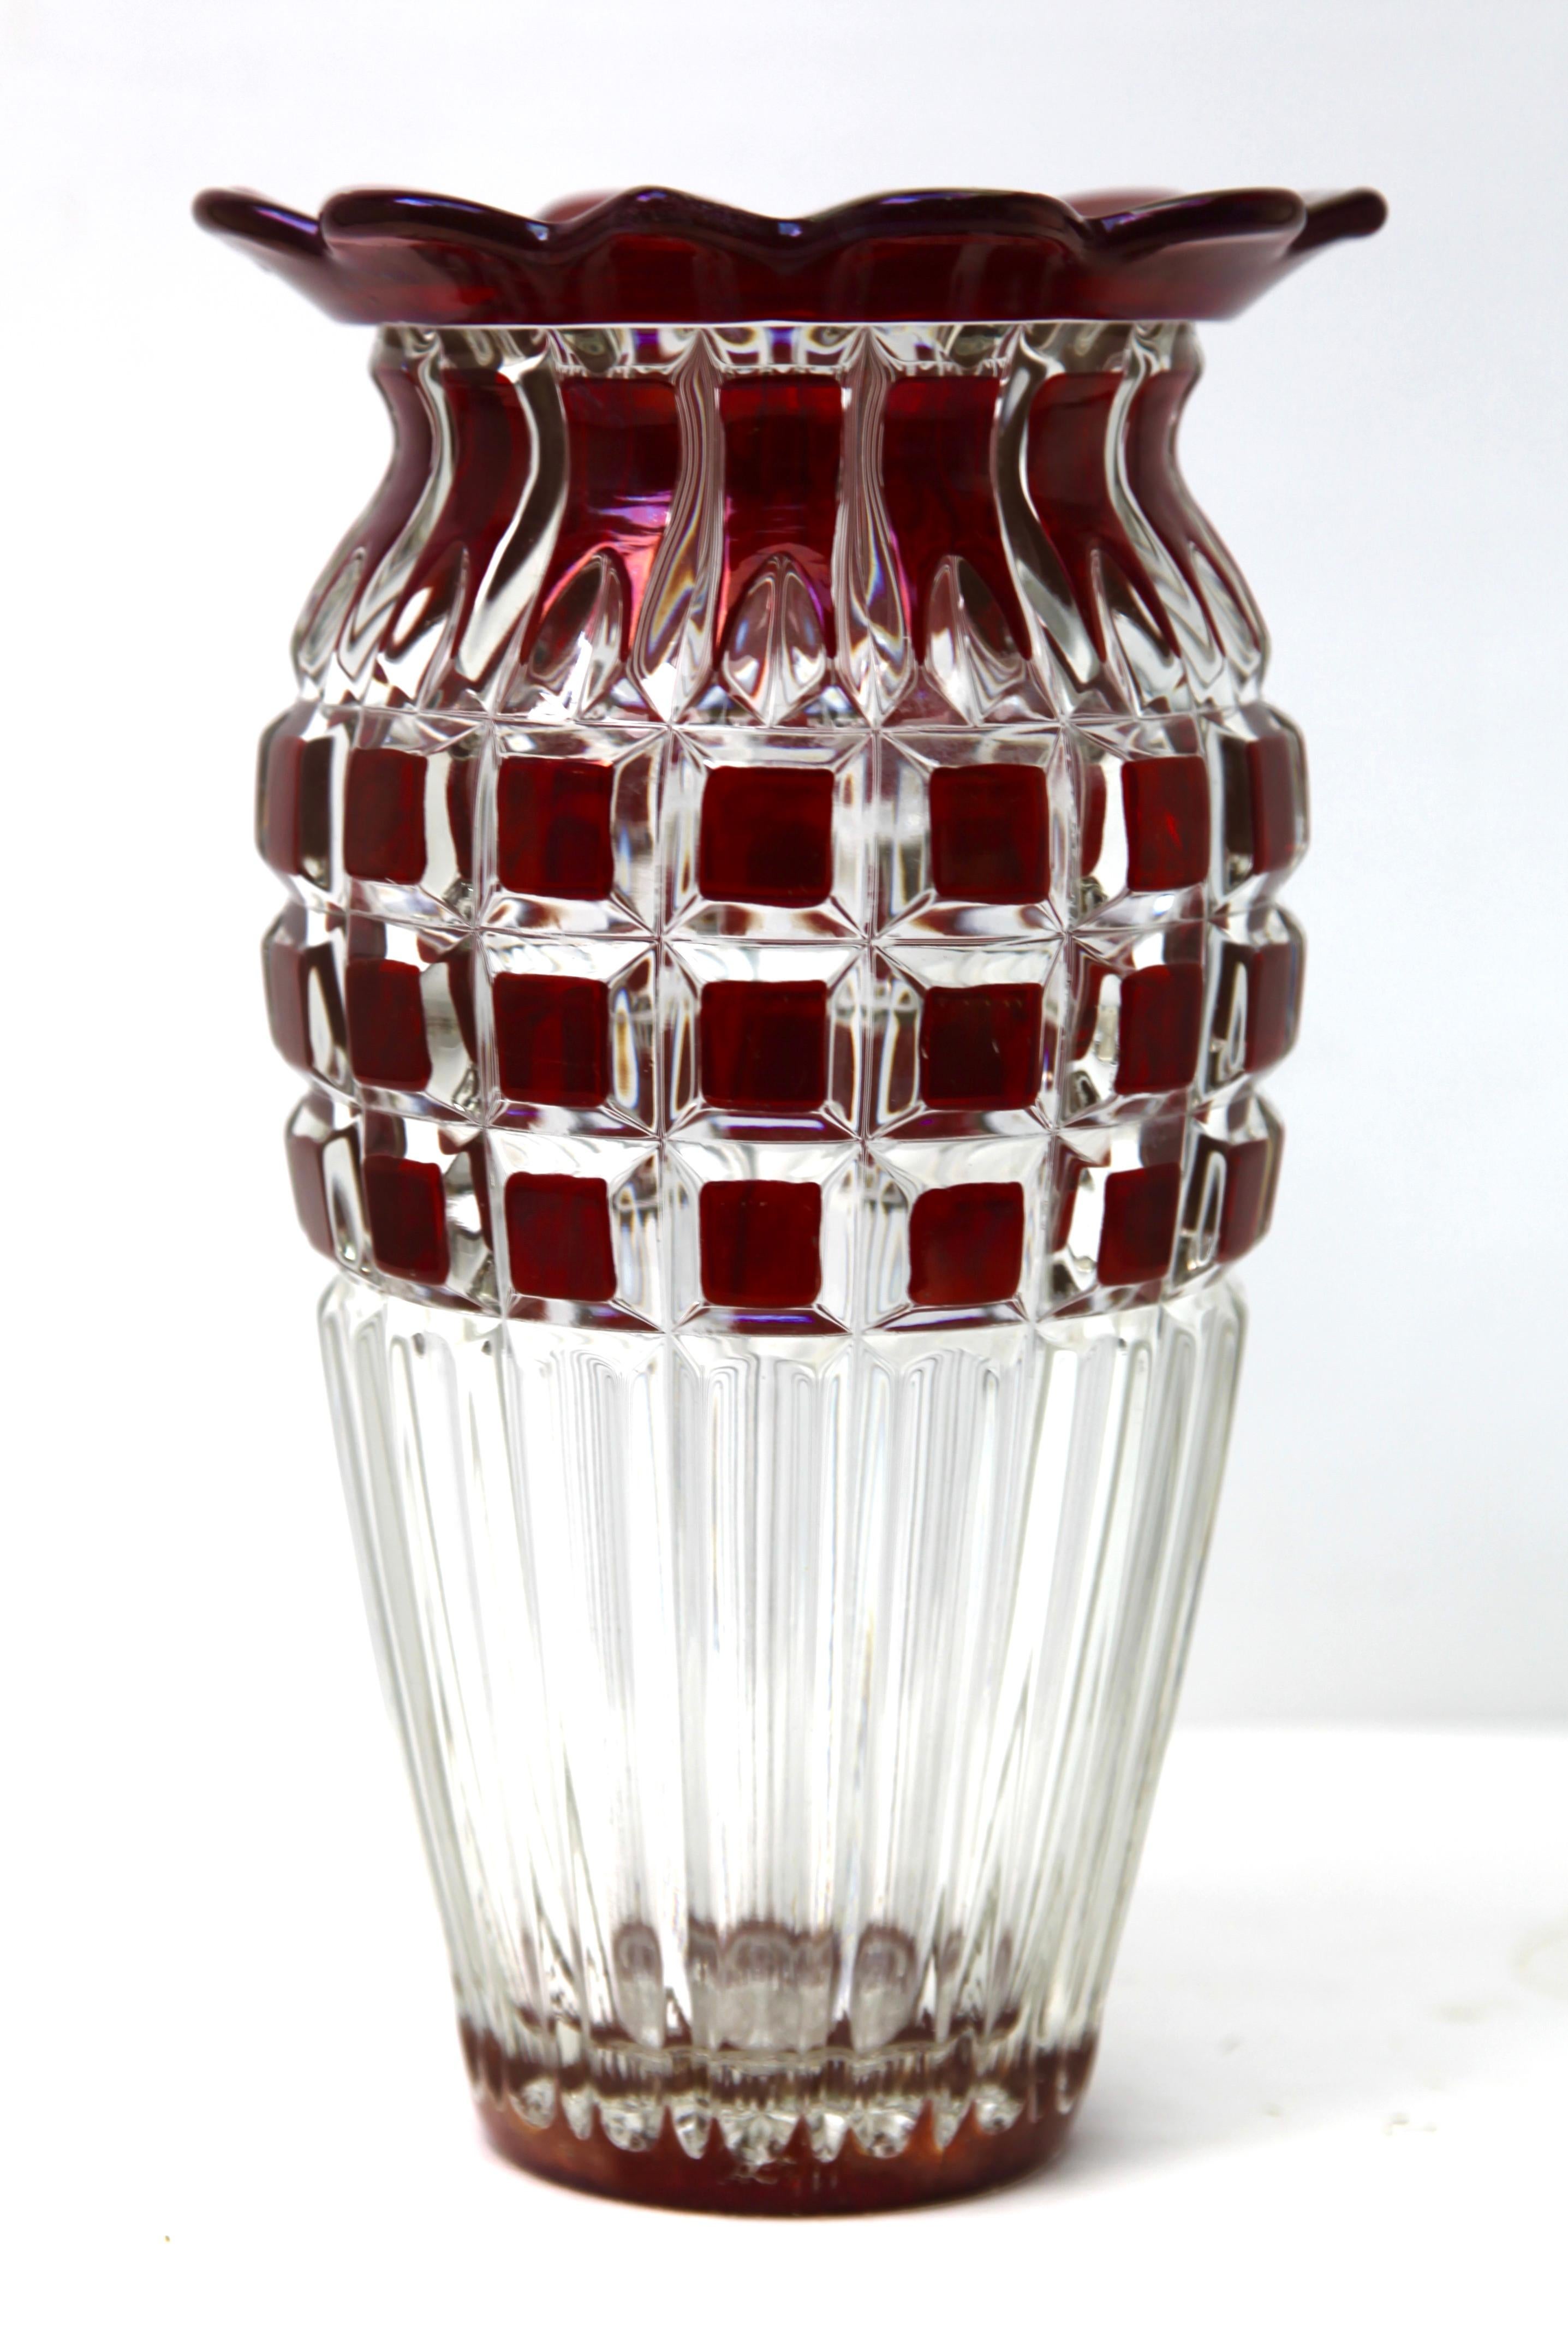 Vibrant, Cranberry collard cased-crystal glass vase in the Bohemian style with cut-to-clear geometric decoration. 
The body contains a good amount of water to keep the arrangement stable and blooming.

Very colorful and a nice bright addition for